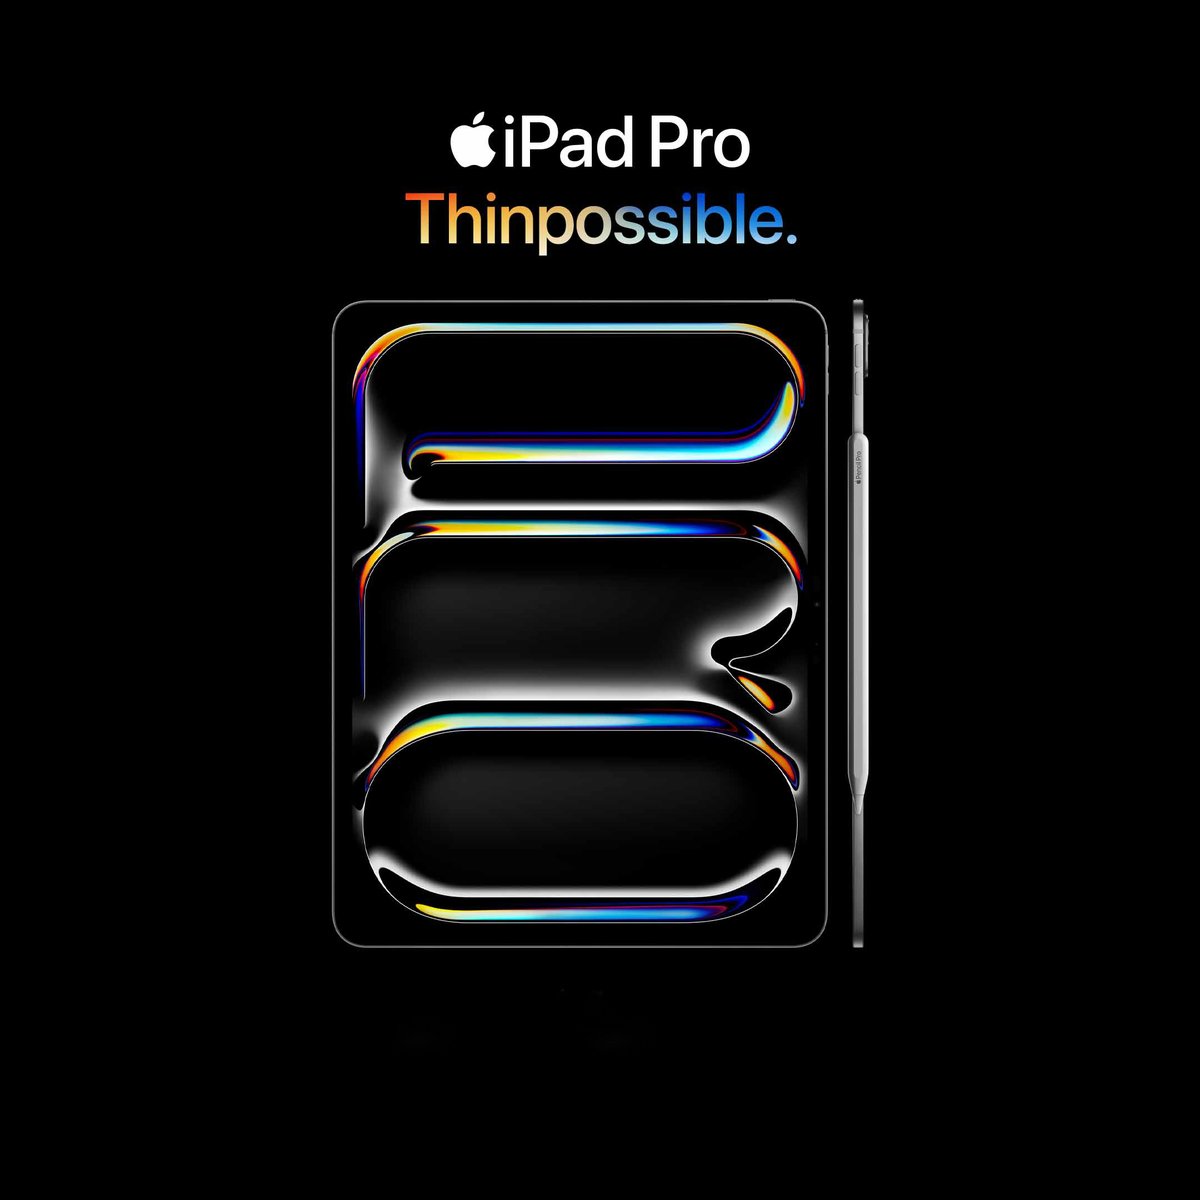 Introducing the new iPad Pro - impossibly thin featuring outrageous performance with the Apple M4 chip. Shop now: spkl.io/601744G6N